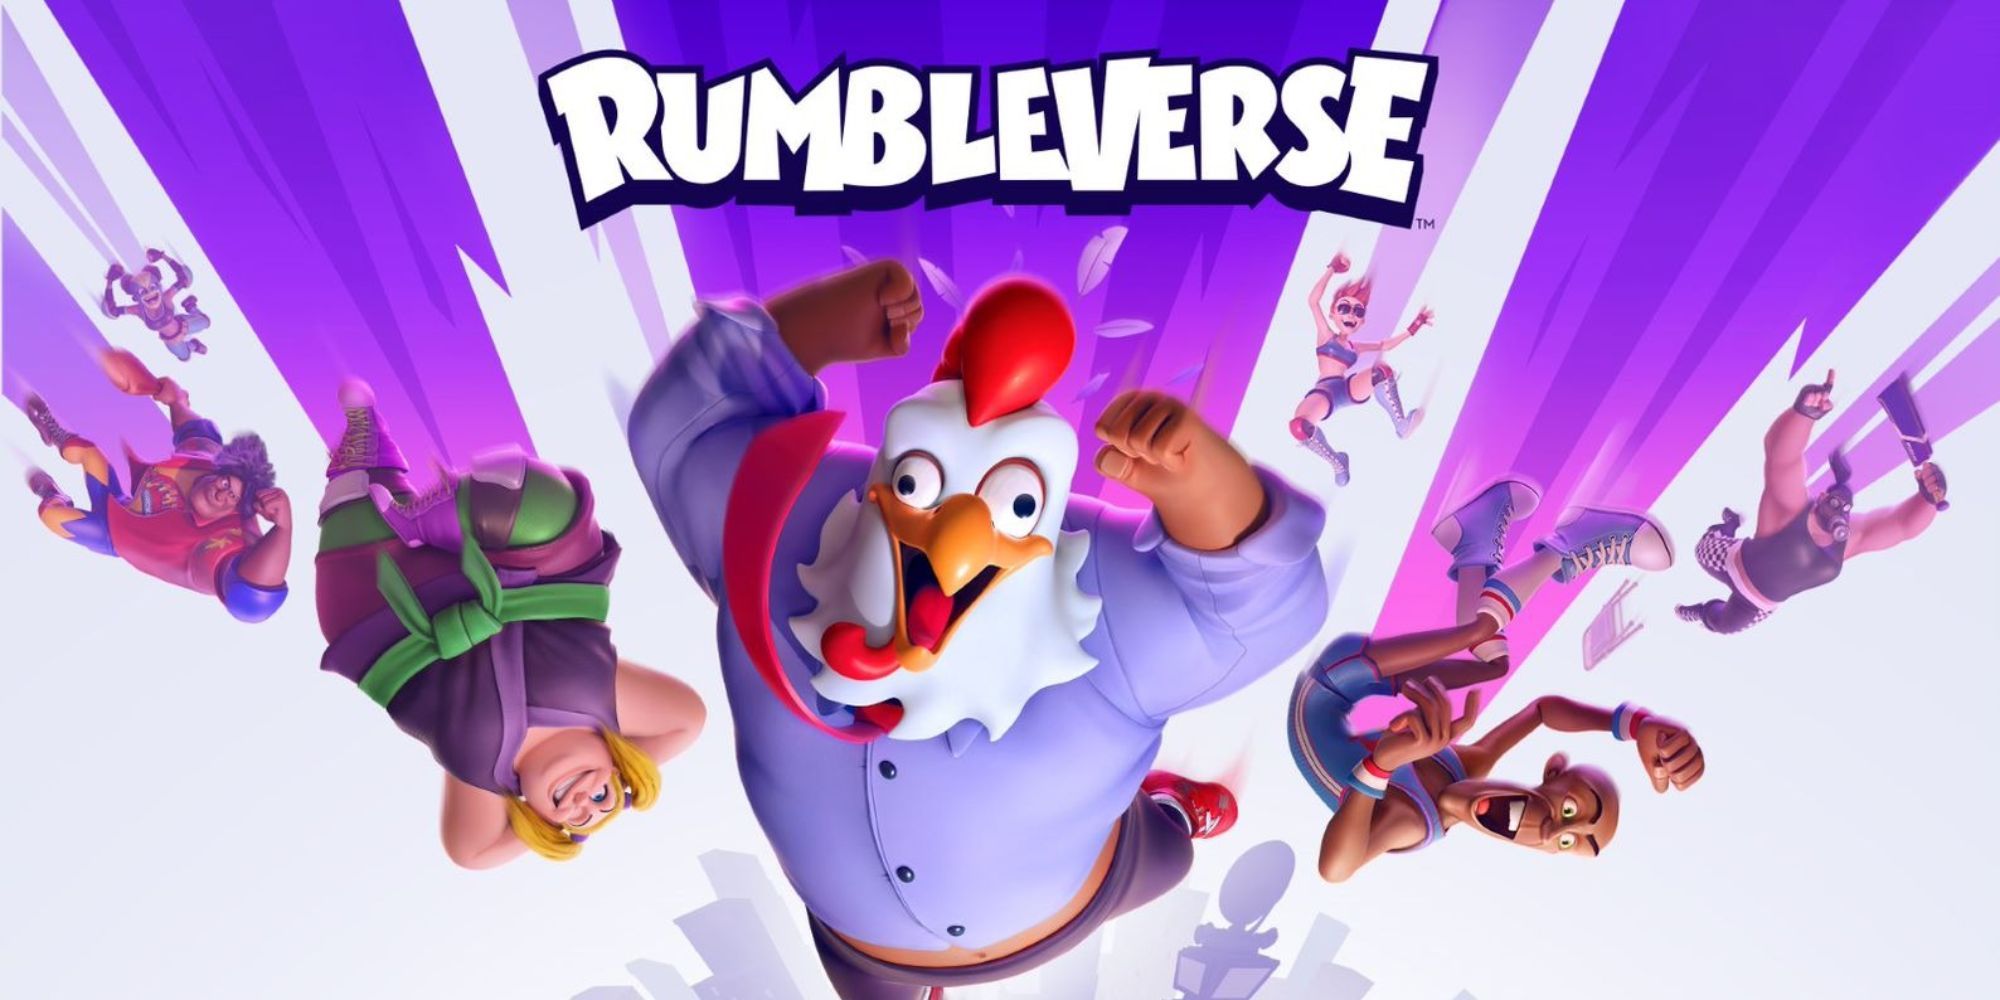 rumbleverse early access sign up